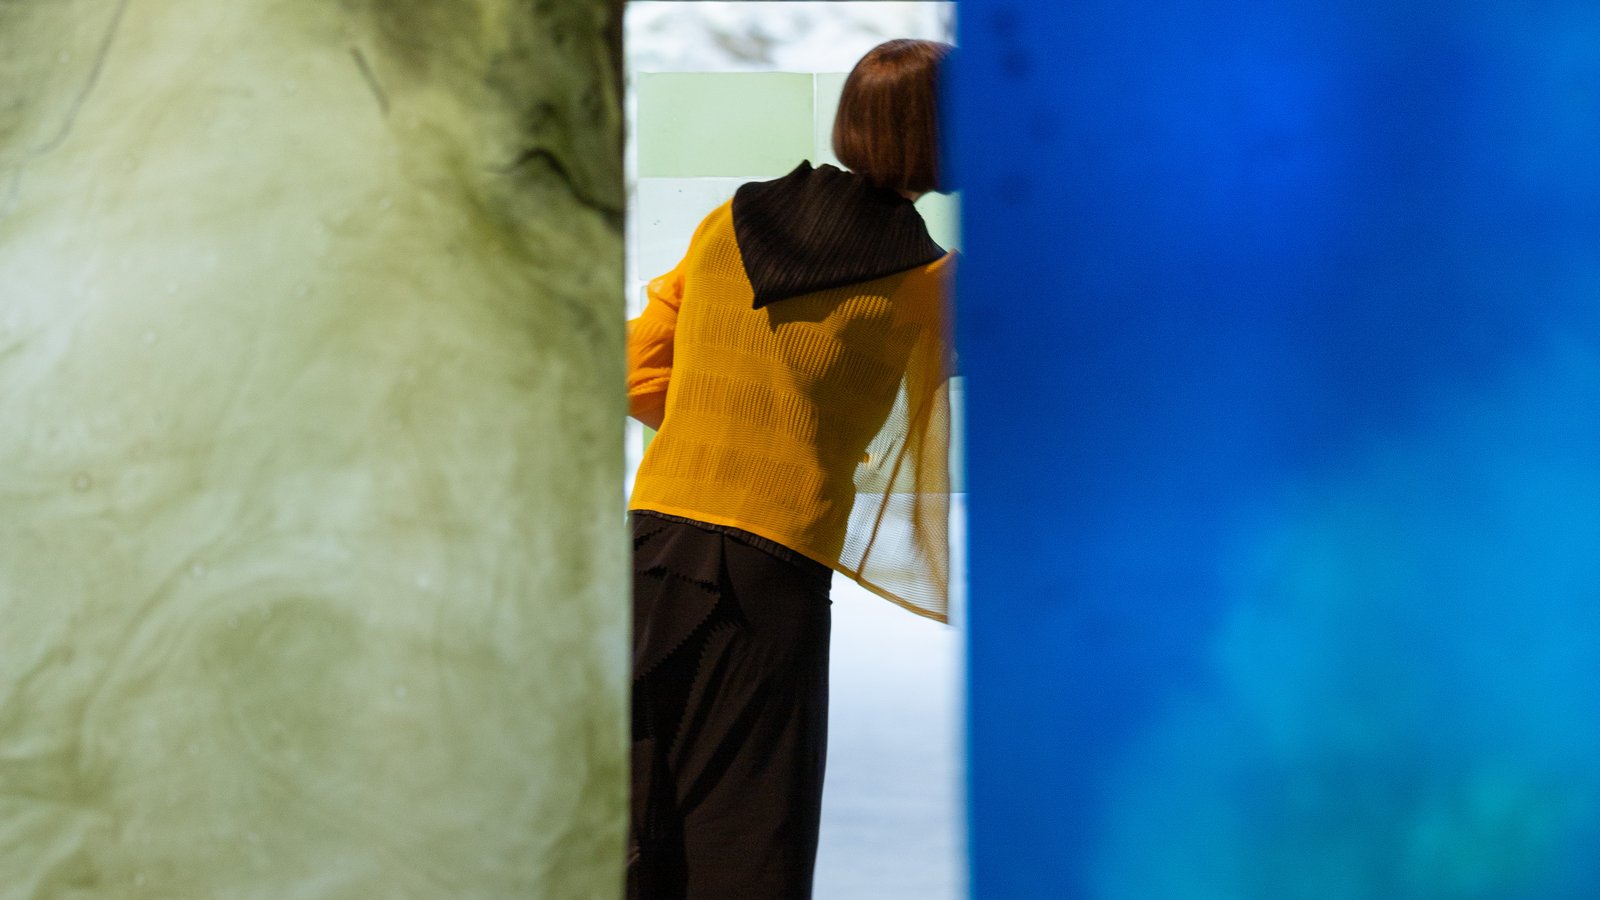 Jessie French, The Myth of Nature, installation at the Cutaway, Rīvus – 23rd Biennale of Sydney, 12 March – 13 June 2022Photo: Jessica MaurierCourtesy of the artist and Anaïs Lellouche